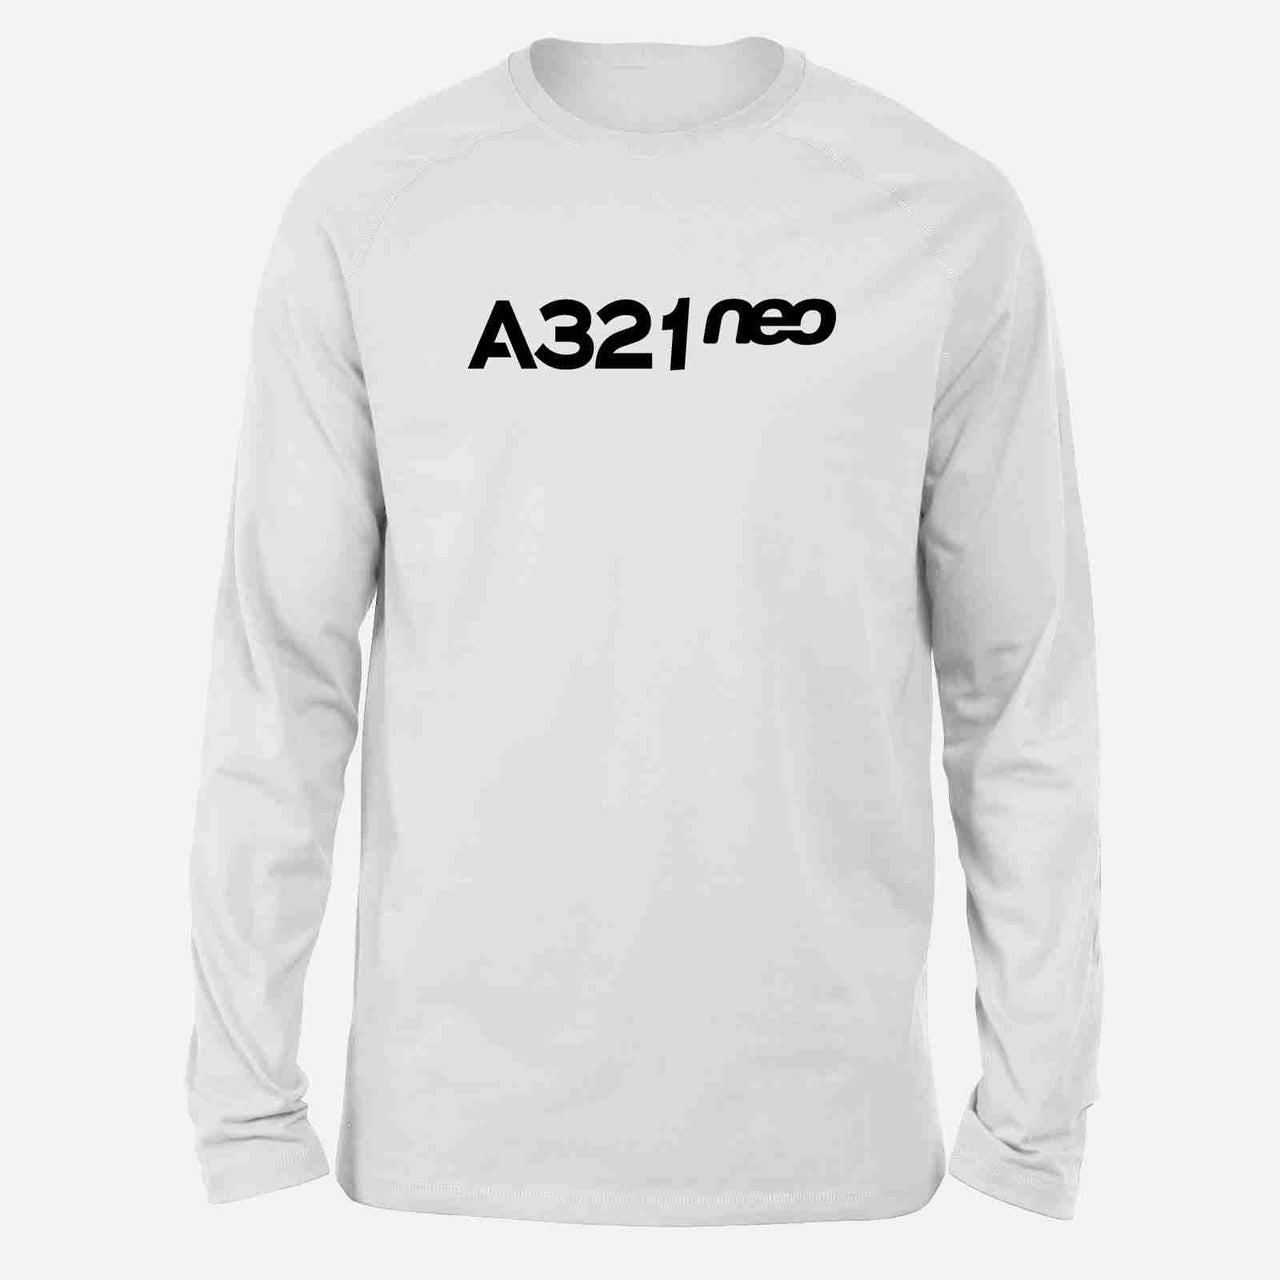 A321neo & Text Designed Long-Sleeve T-Shirts